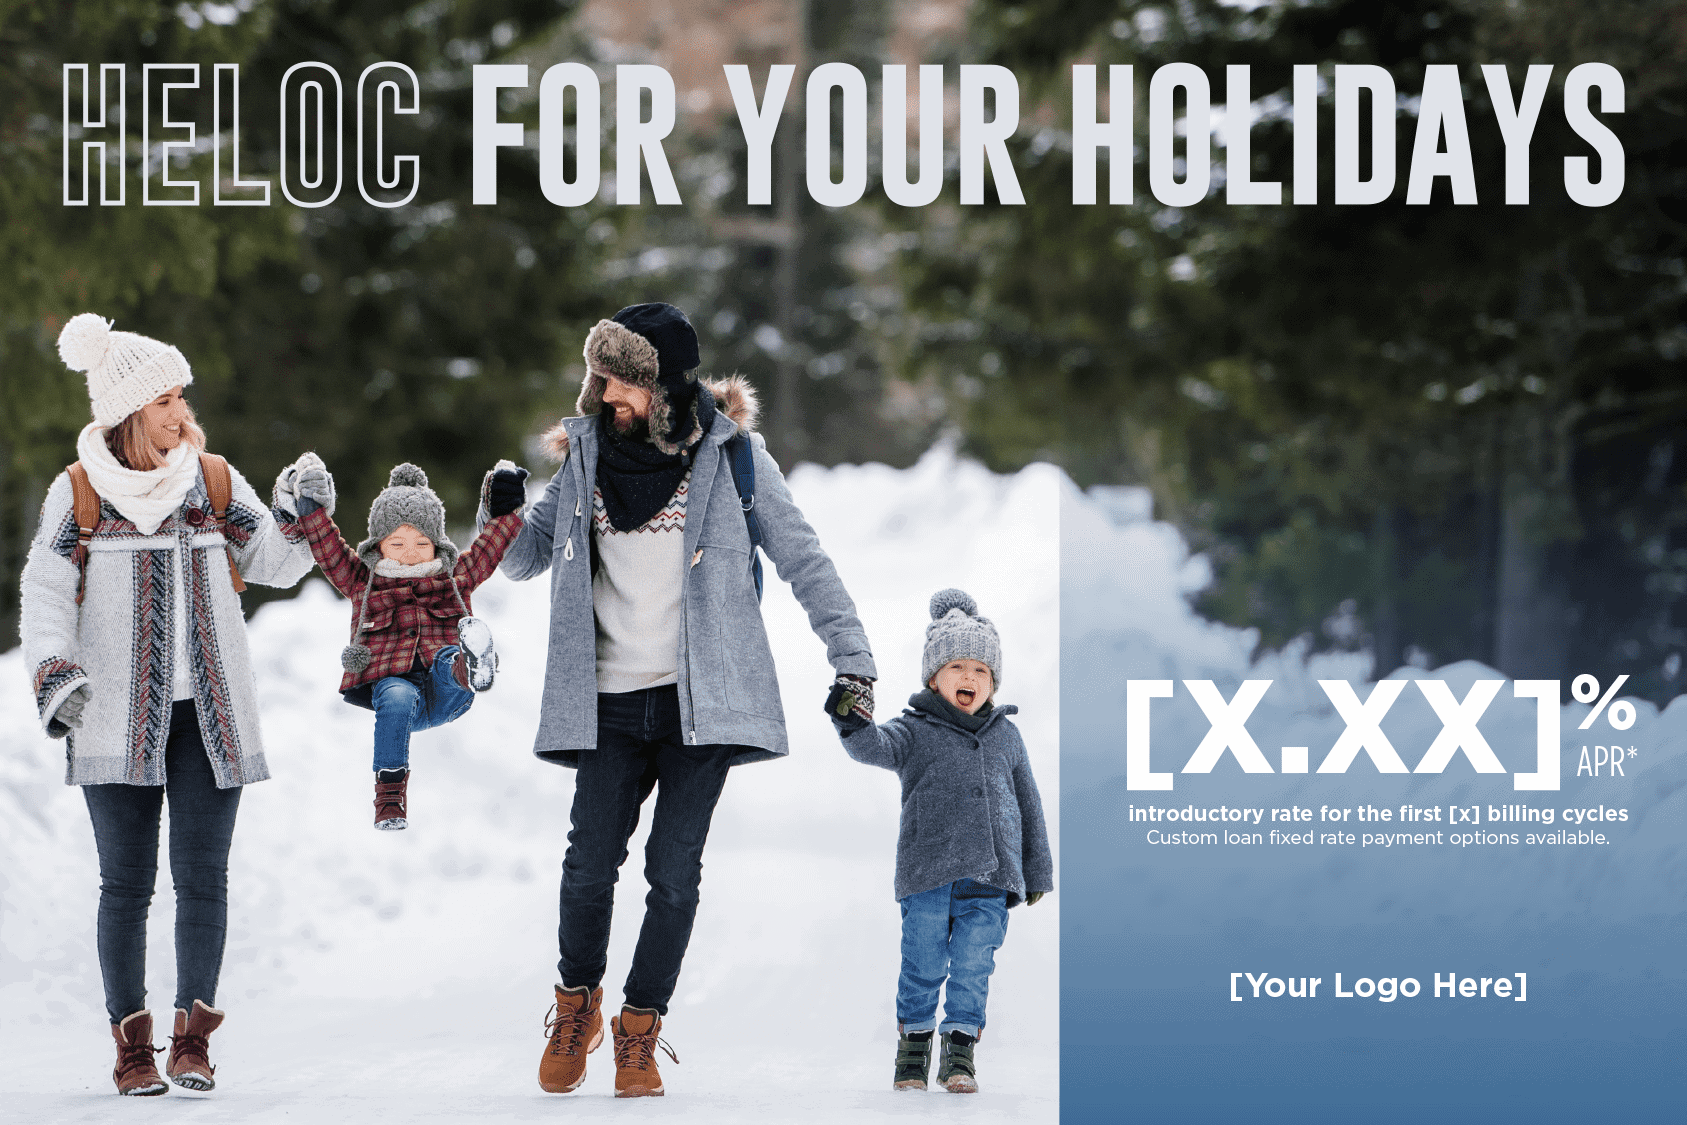 HELOC Postcard – For Your Holidays